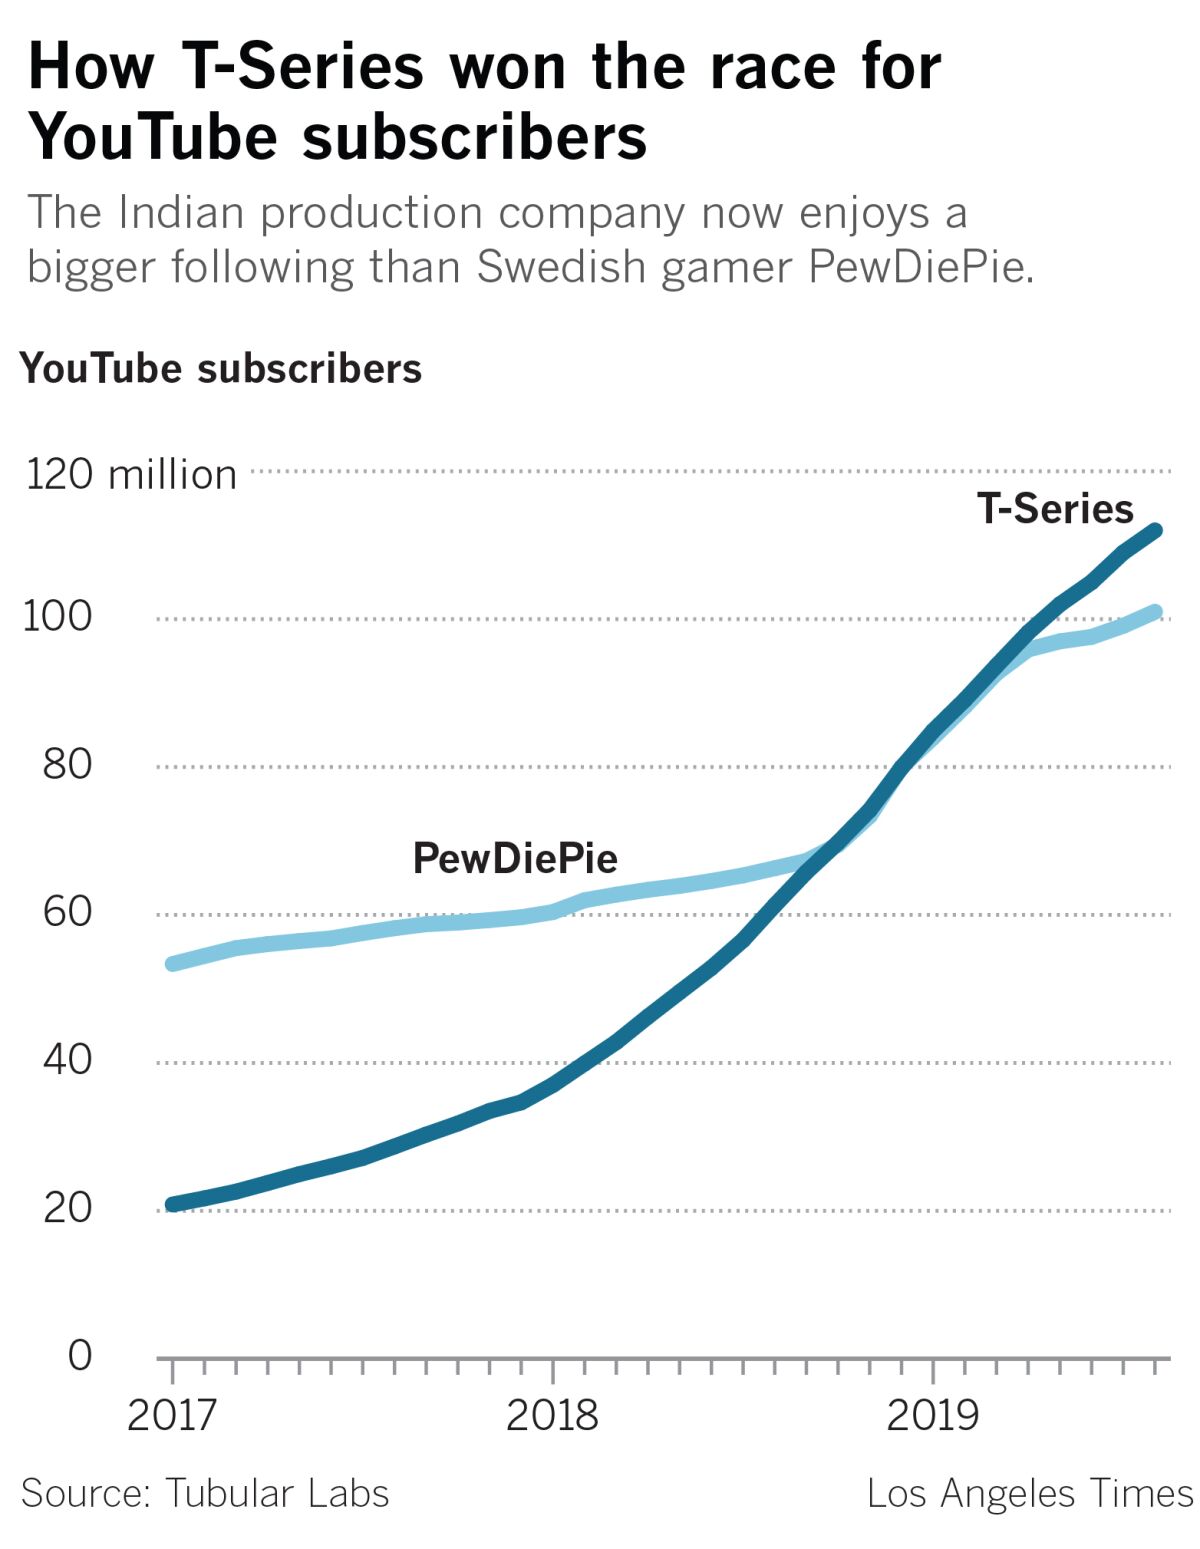 Number of YouTube subscribers following T-Series and PewDiePie.